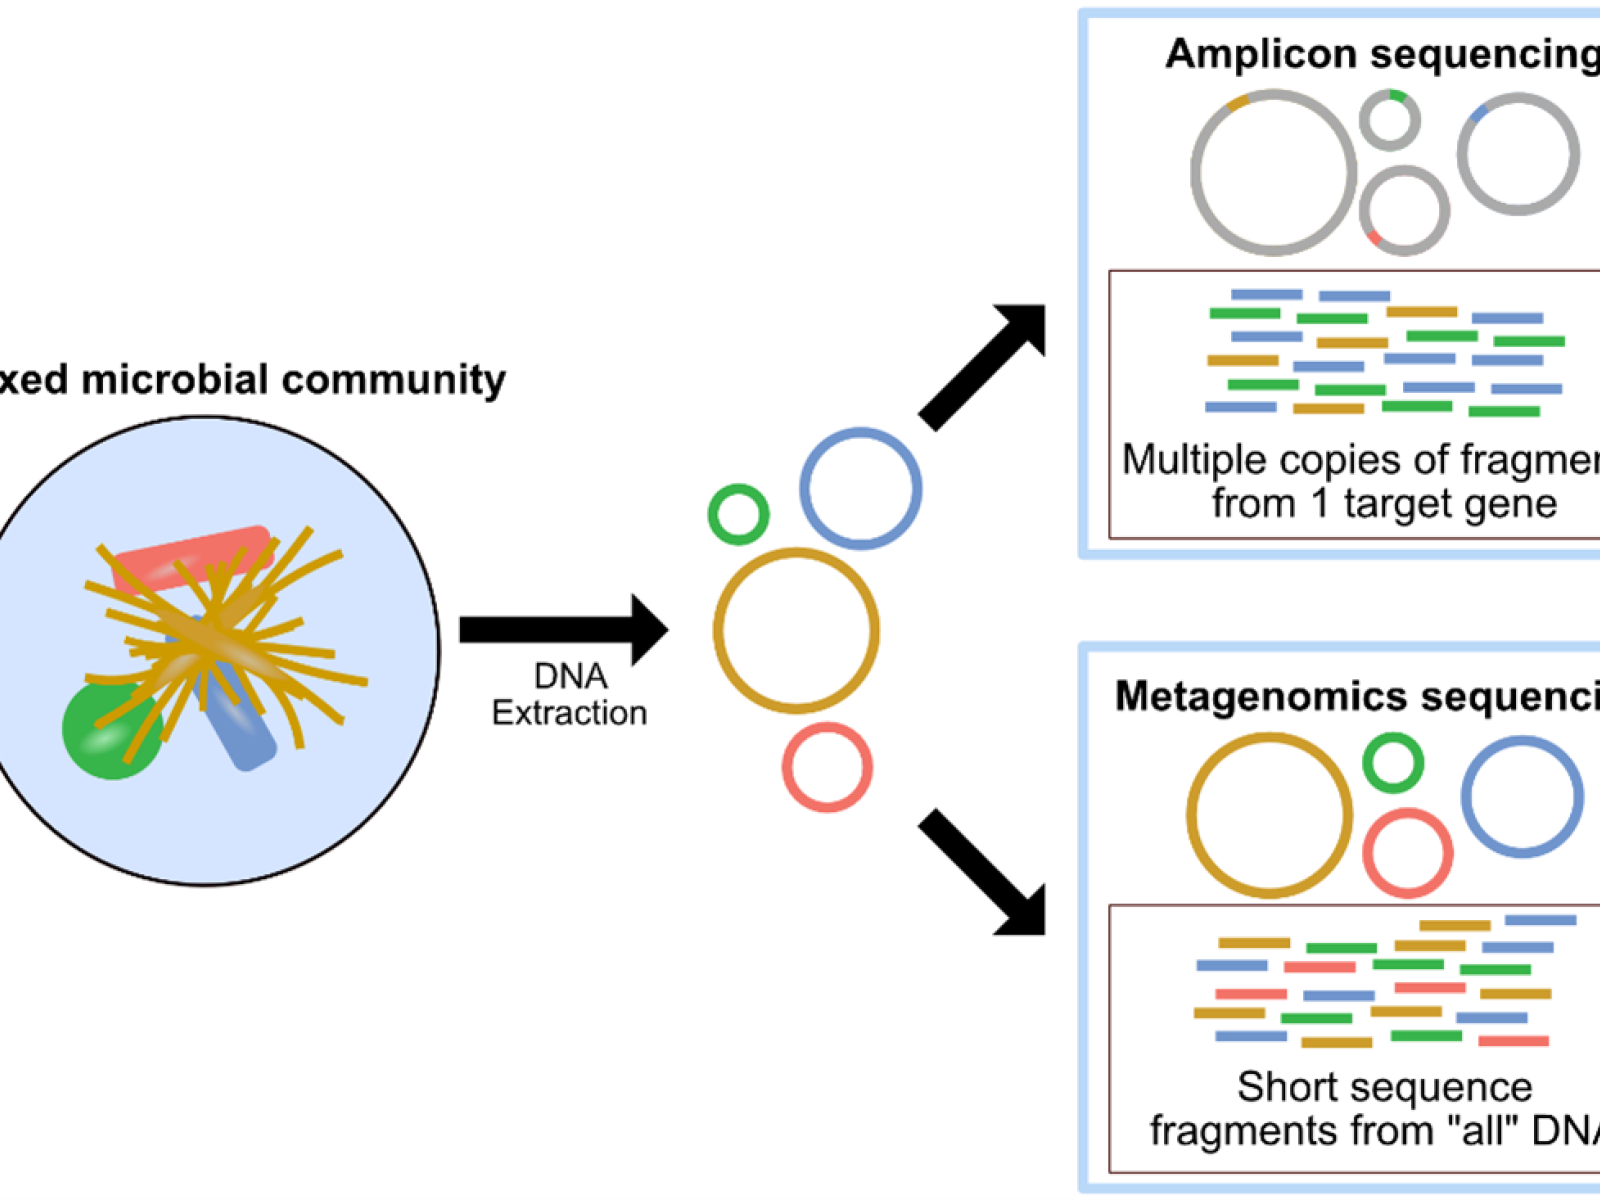 Image shows the Amplicon sequencing methodology.